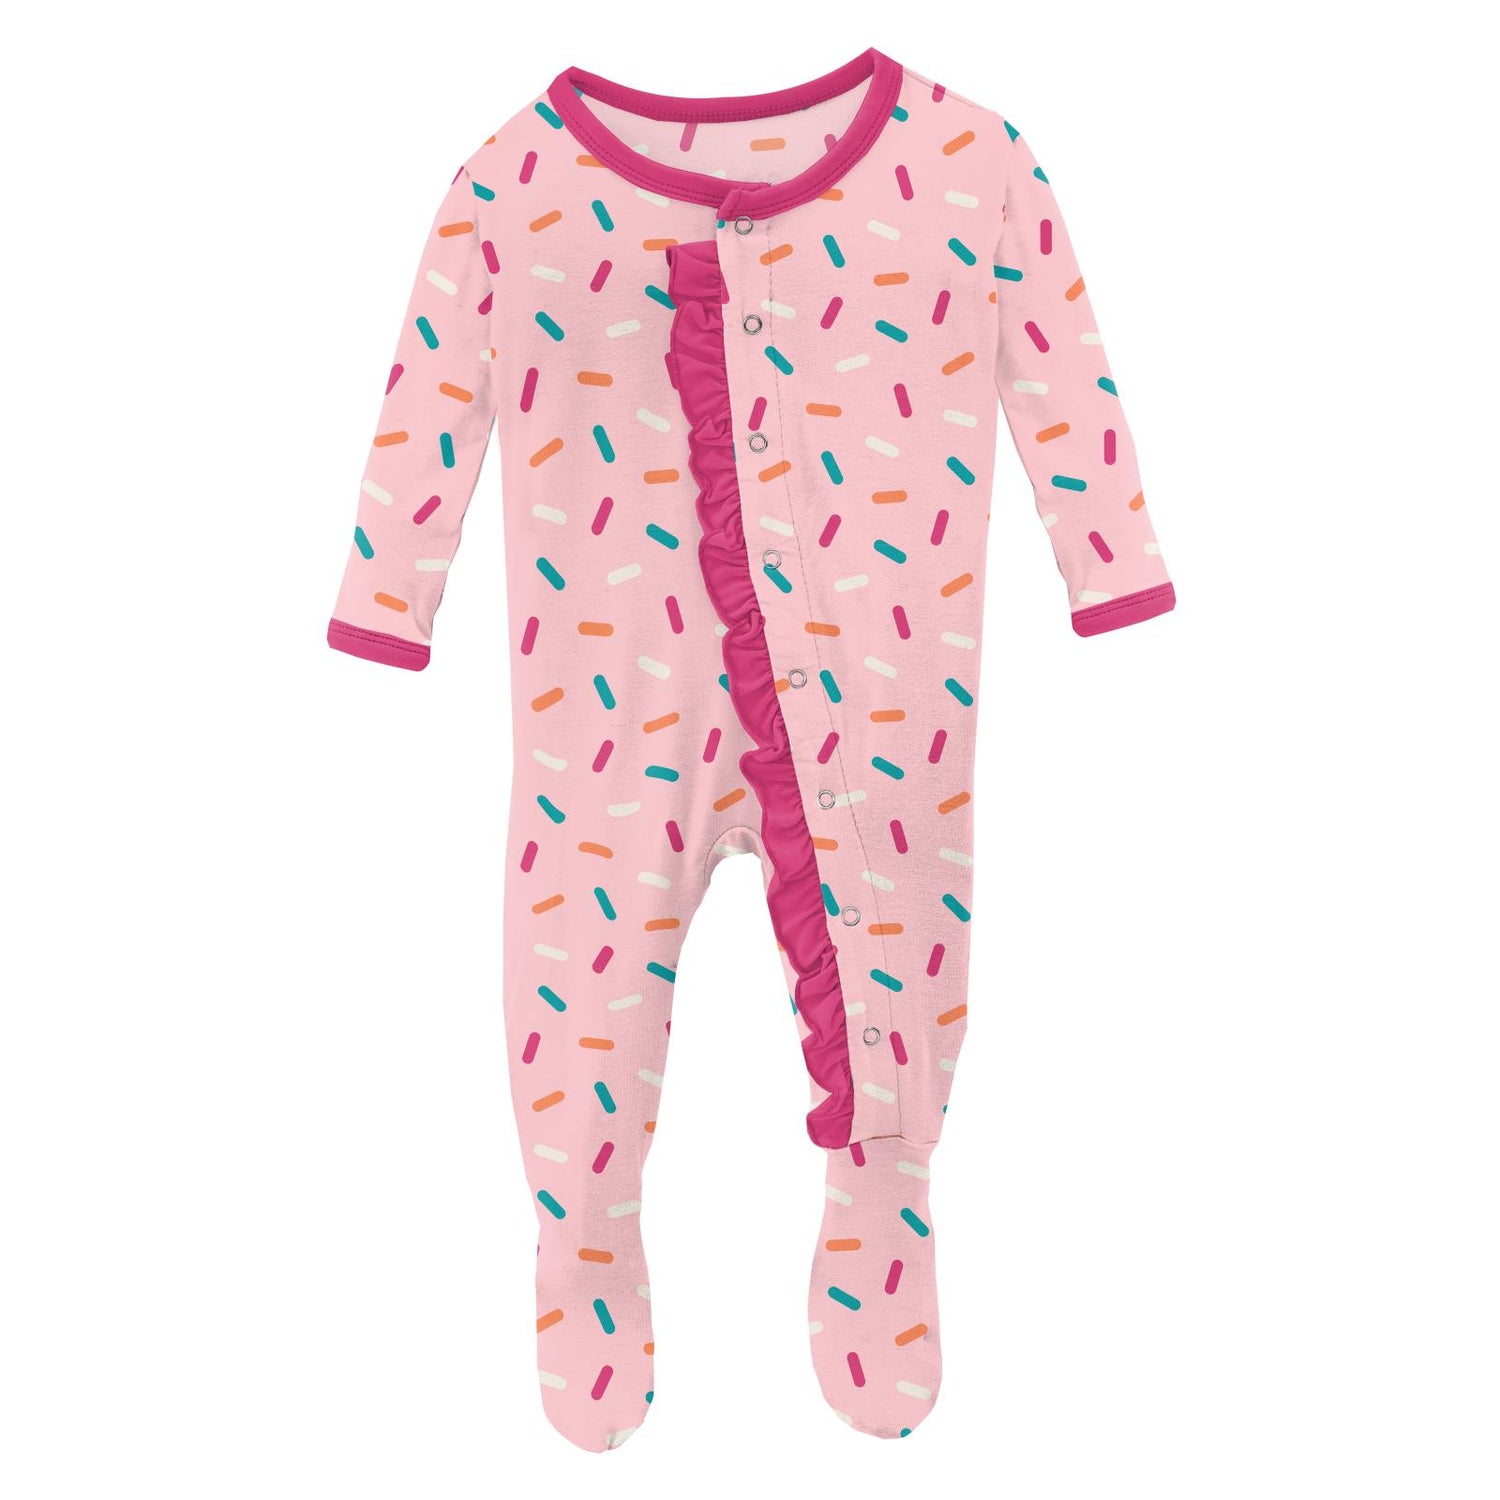 Print Classic Ruffle Footie with Snaps in Lotus Sprinkles